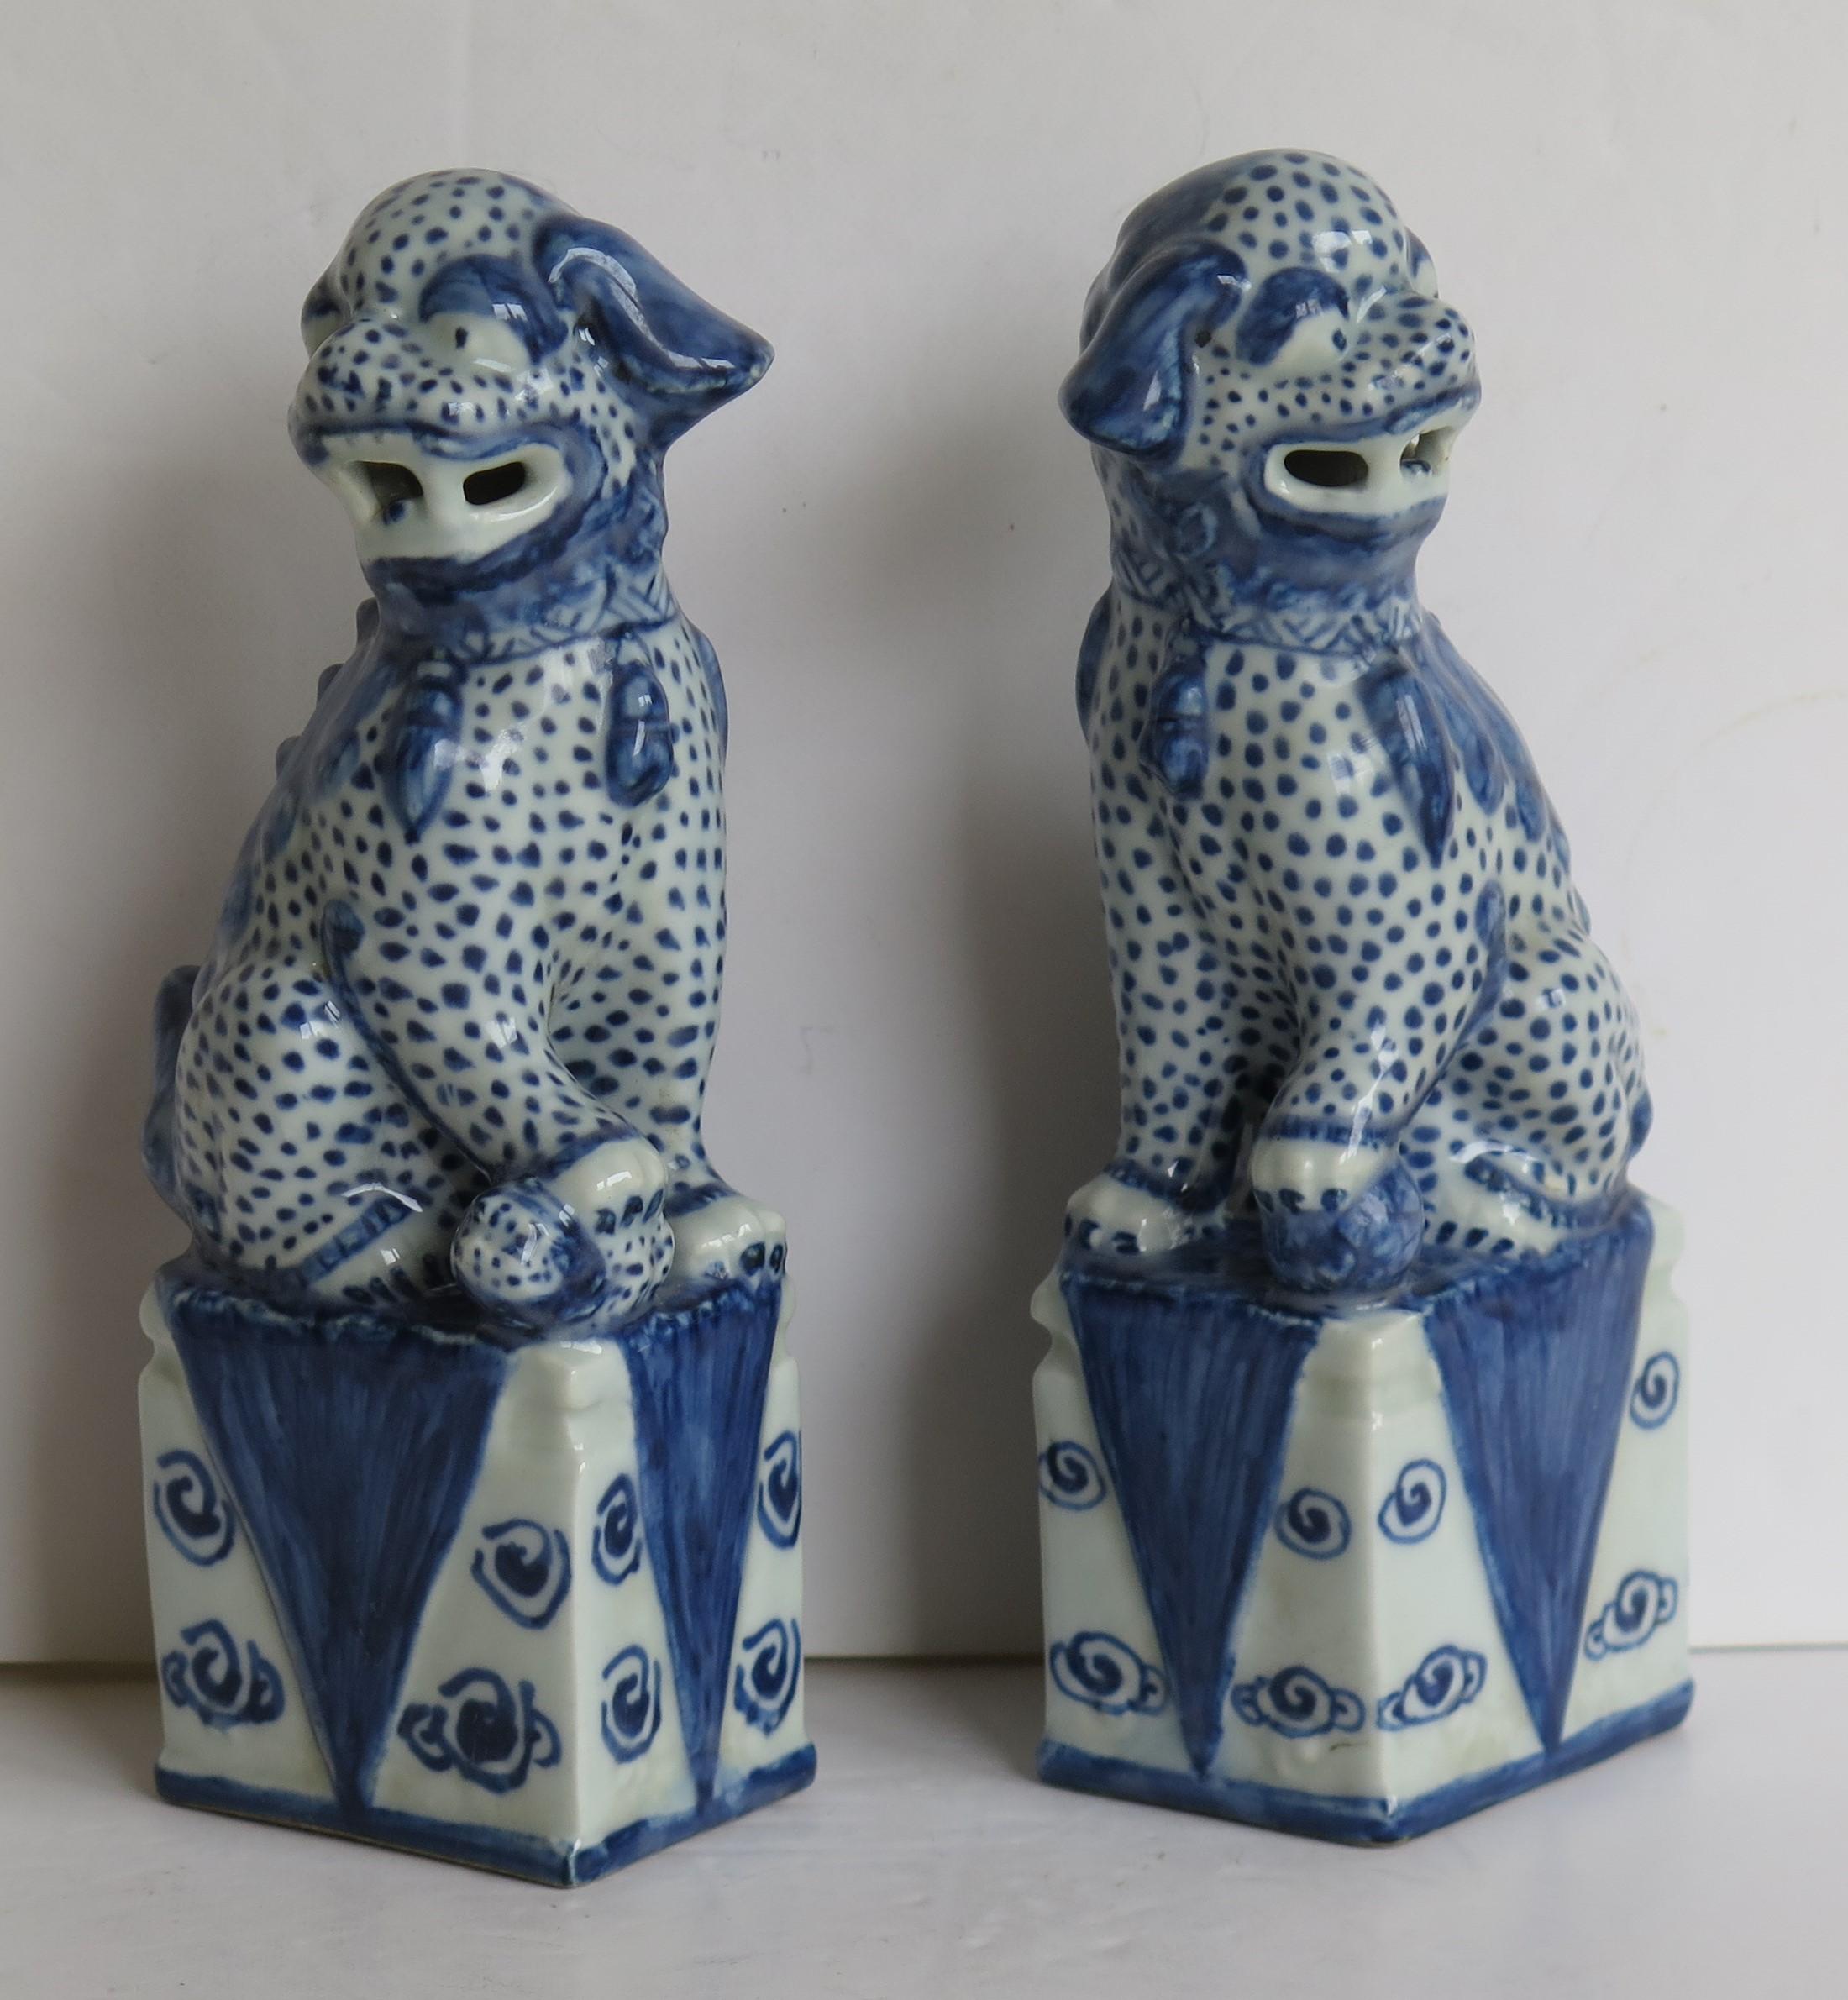 These are a very good pair of Chinese Export, blue and white porcelain foo or lion dogs, sometimes called temple lions.

They are a male and female pair, sitting on rectangular plinths, one with a puppy under one paw and the other one with a